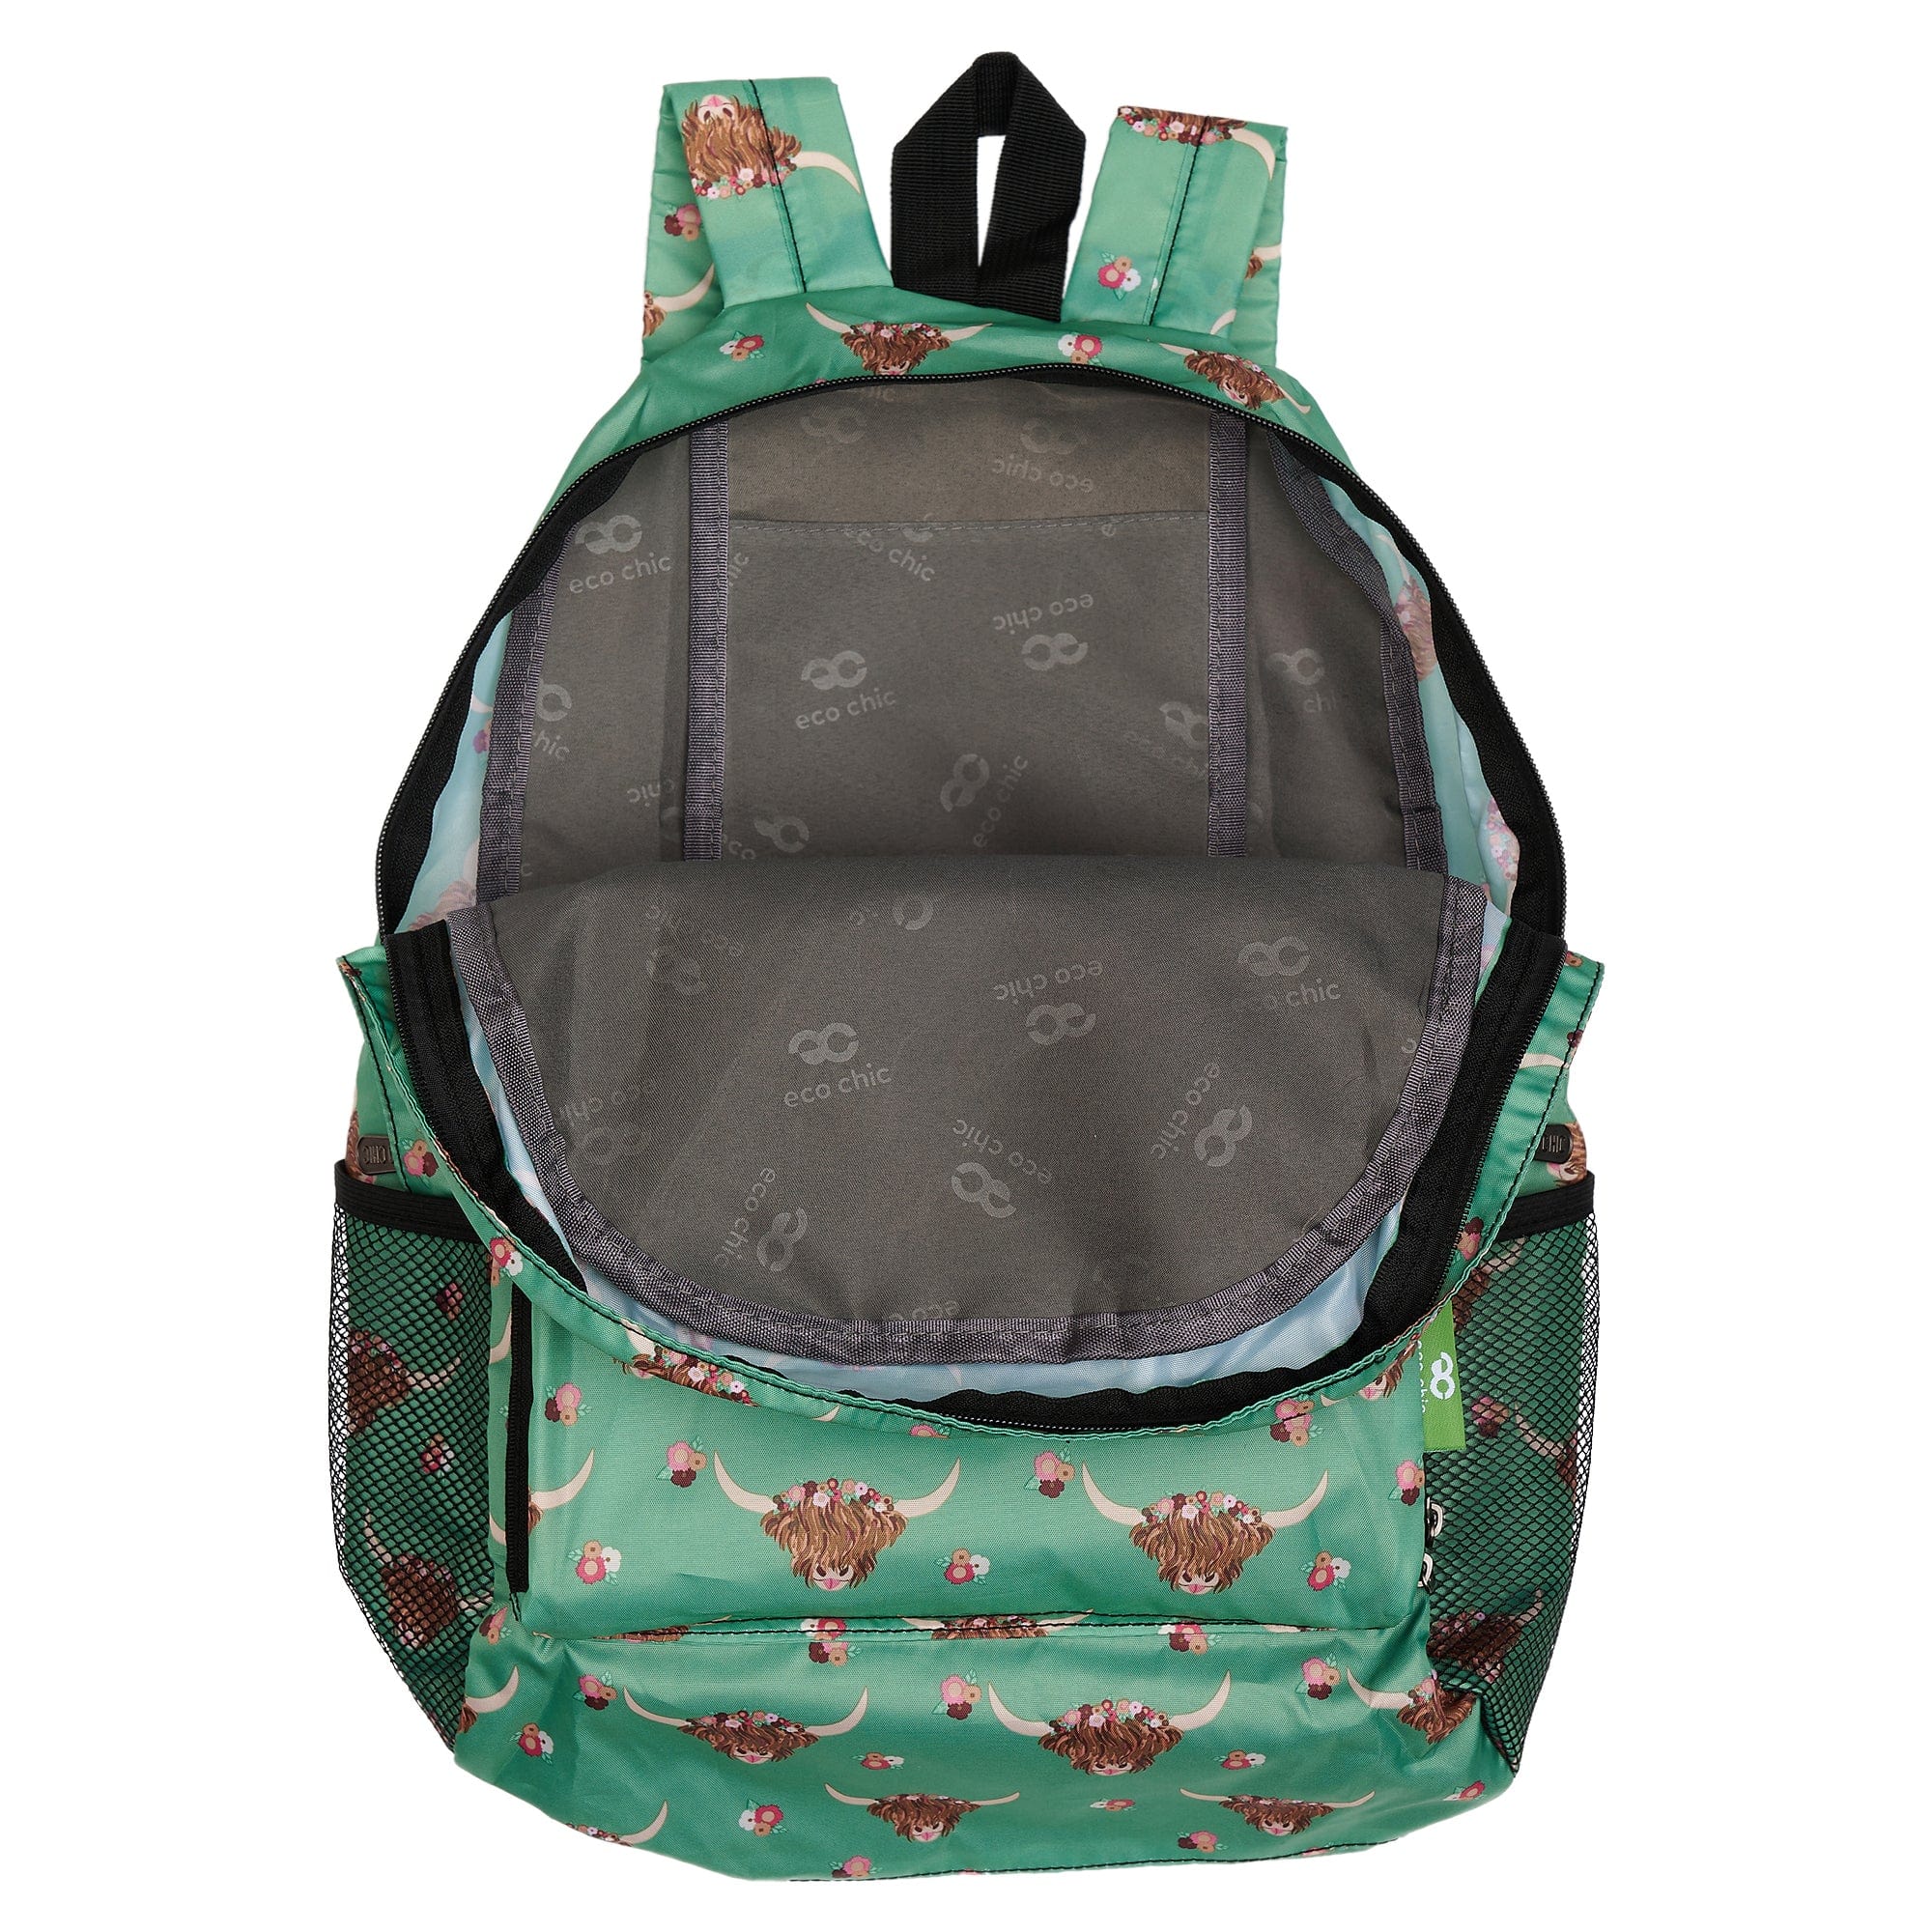 Eco Chic Green Eco Chic Lightweight Foldable Backpack Floral Highland Cow